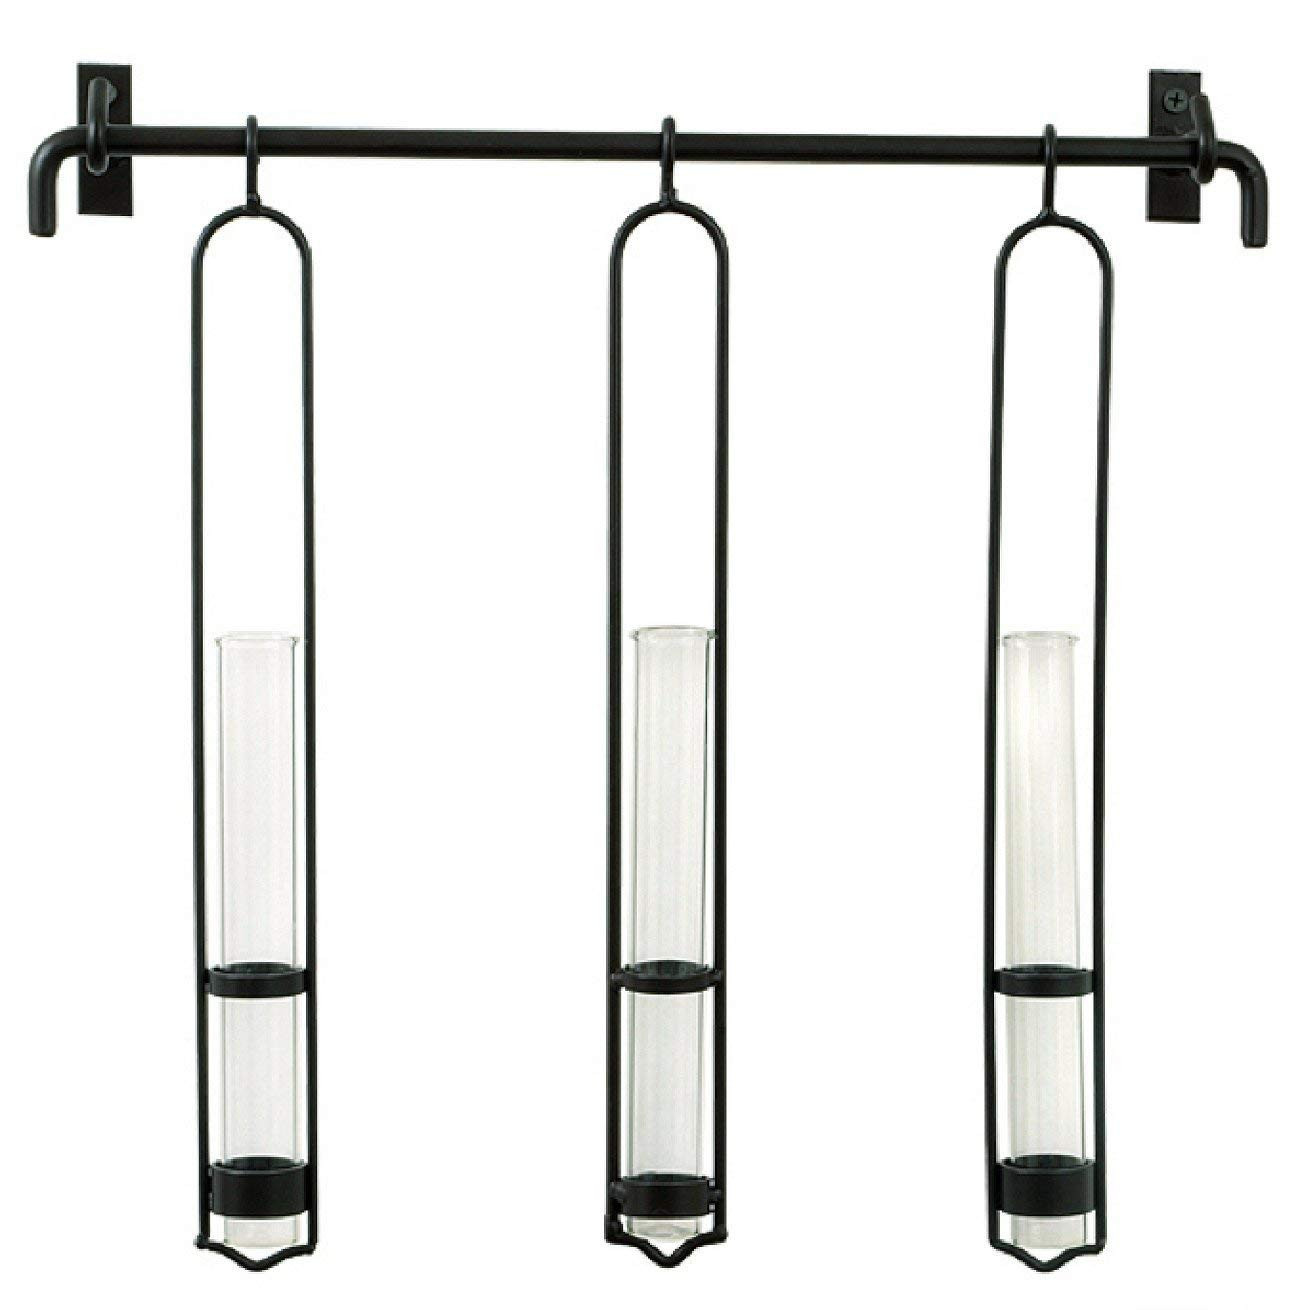 24 Best Plant Rooter Vase 2024 free download plant rooter vase of amazon com unique set of 3 glass tube floral plant rooter or spice regarding amazon com unique set of 3 glass tube floral plant rooter or spice wall vases g101f with dec